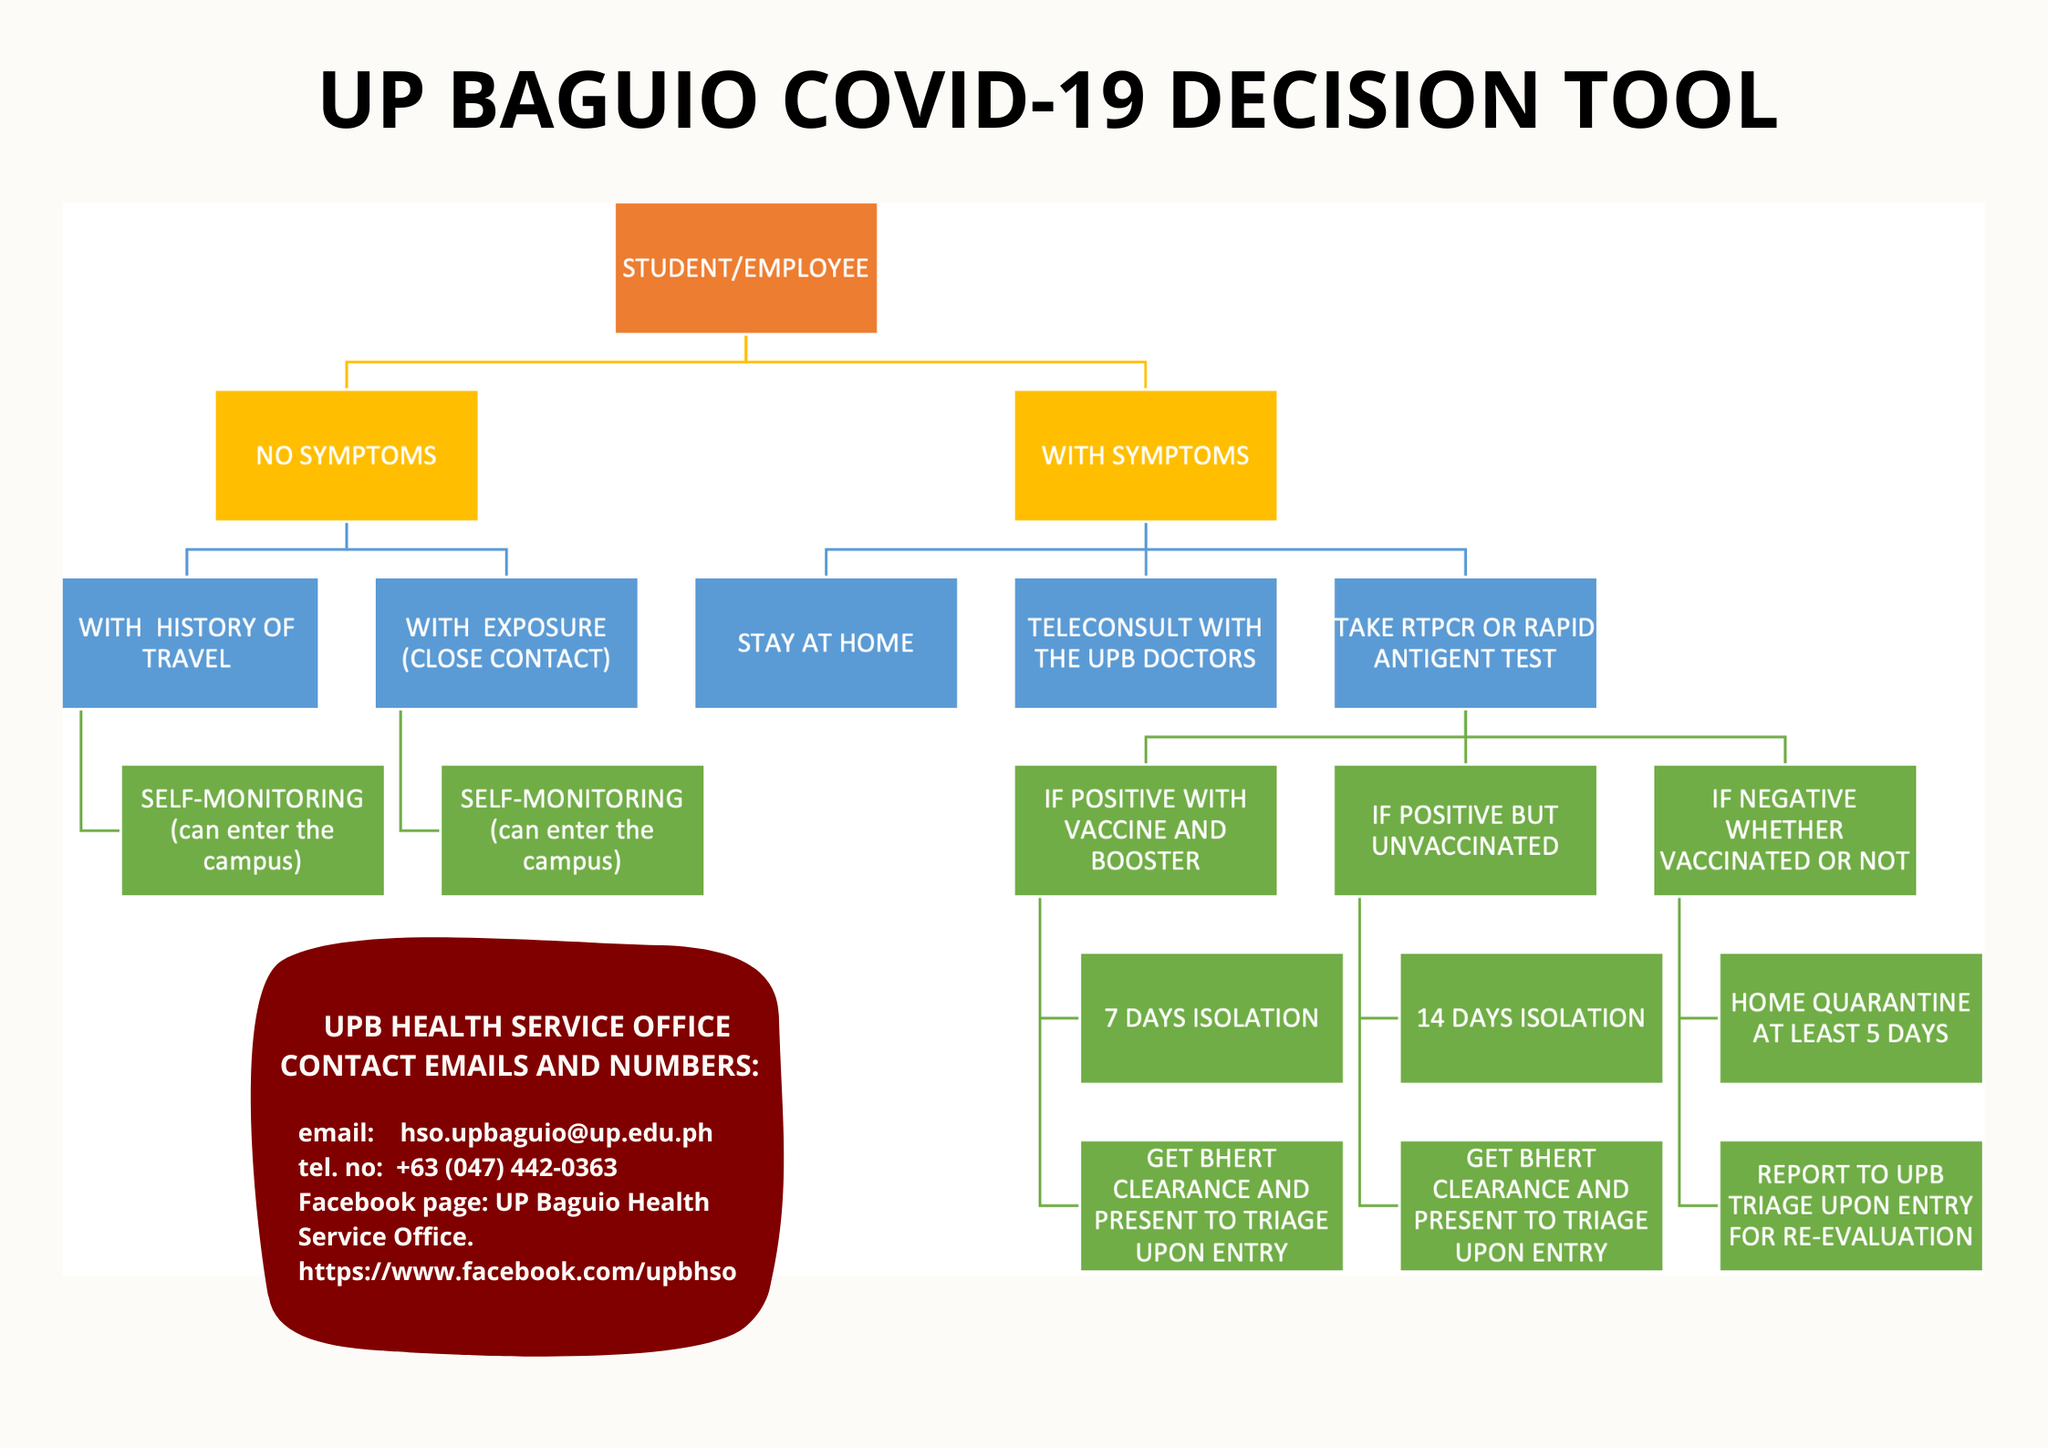 UP Baguio’s COVID-19 Decision Tool